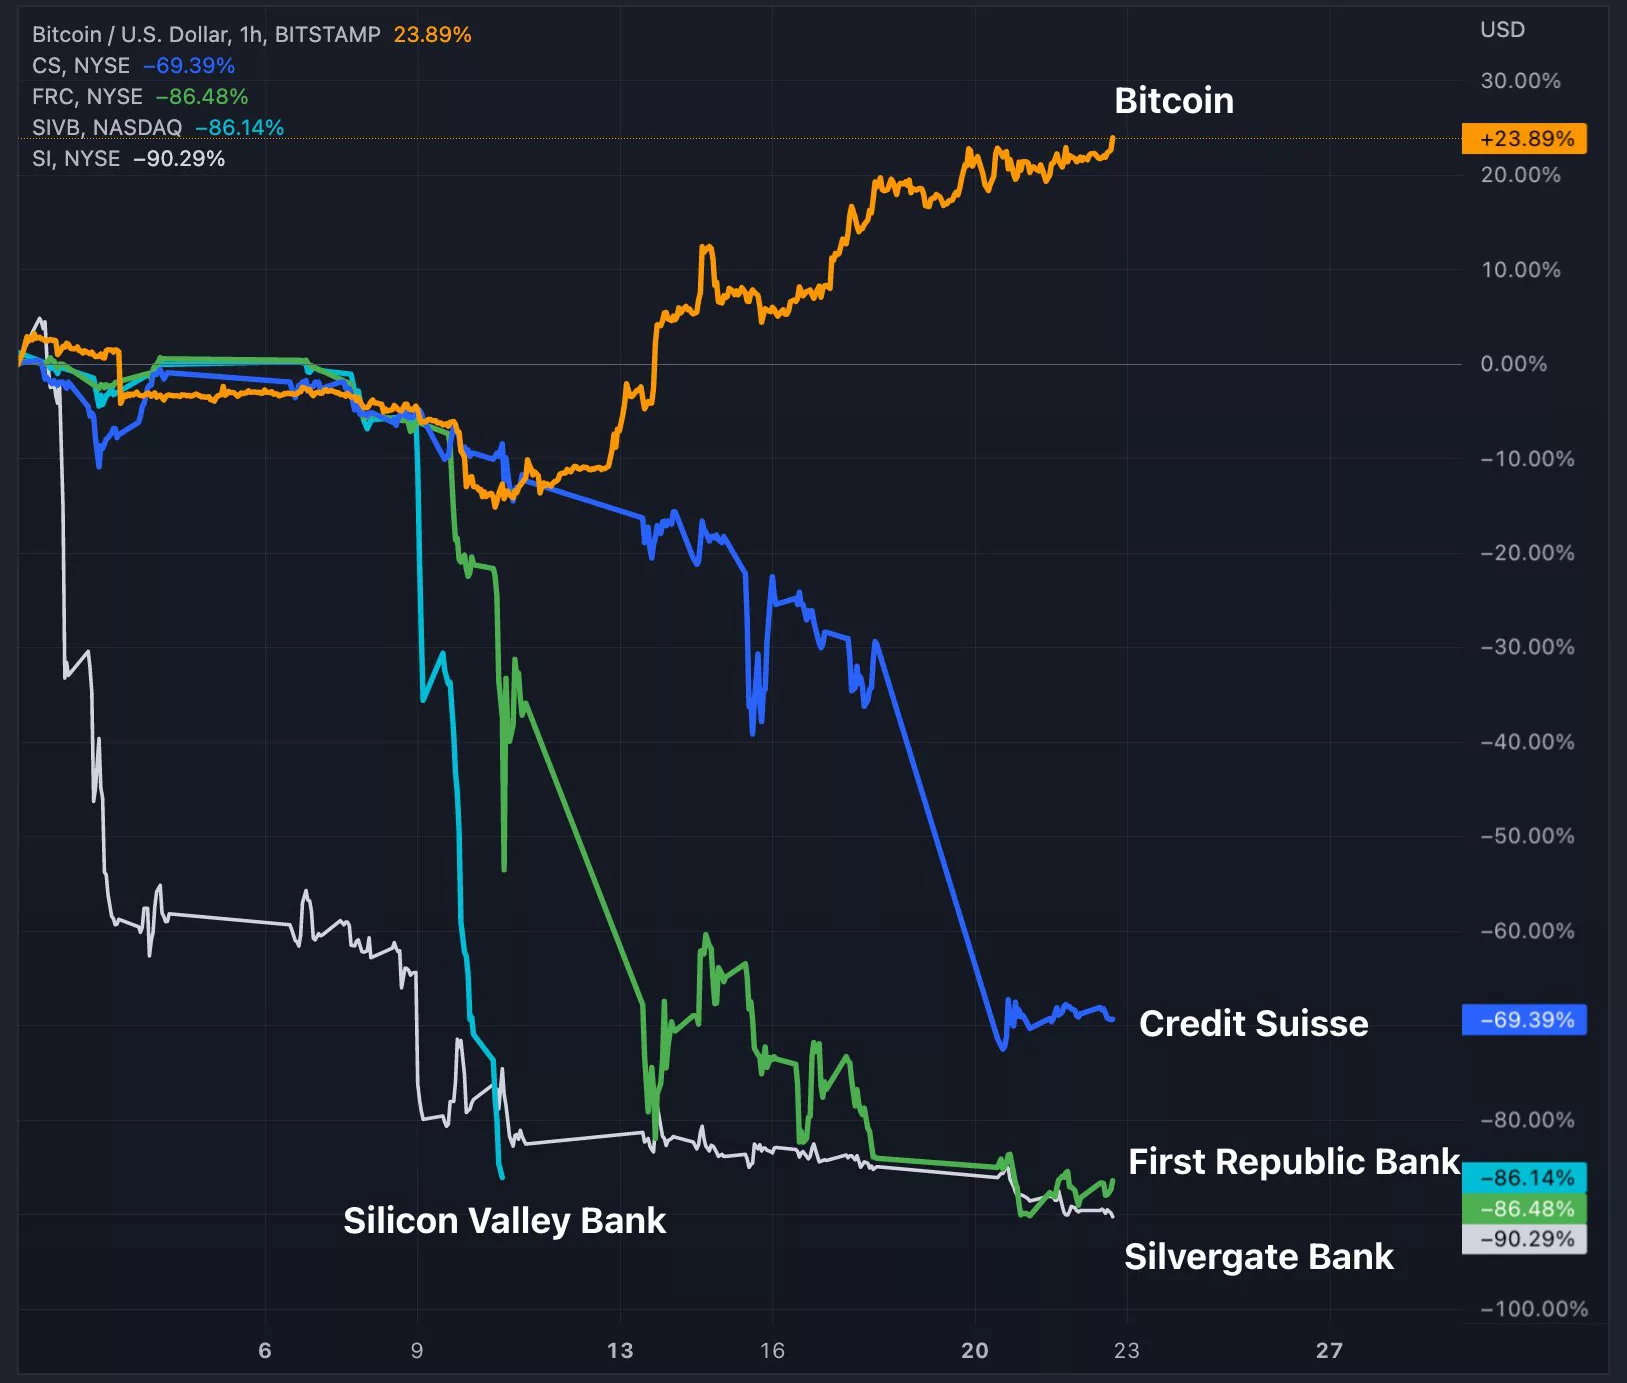 Bitcoin's performance during March banking crisis.